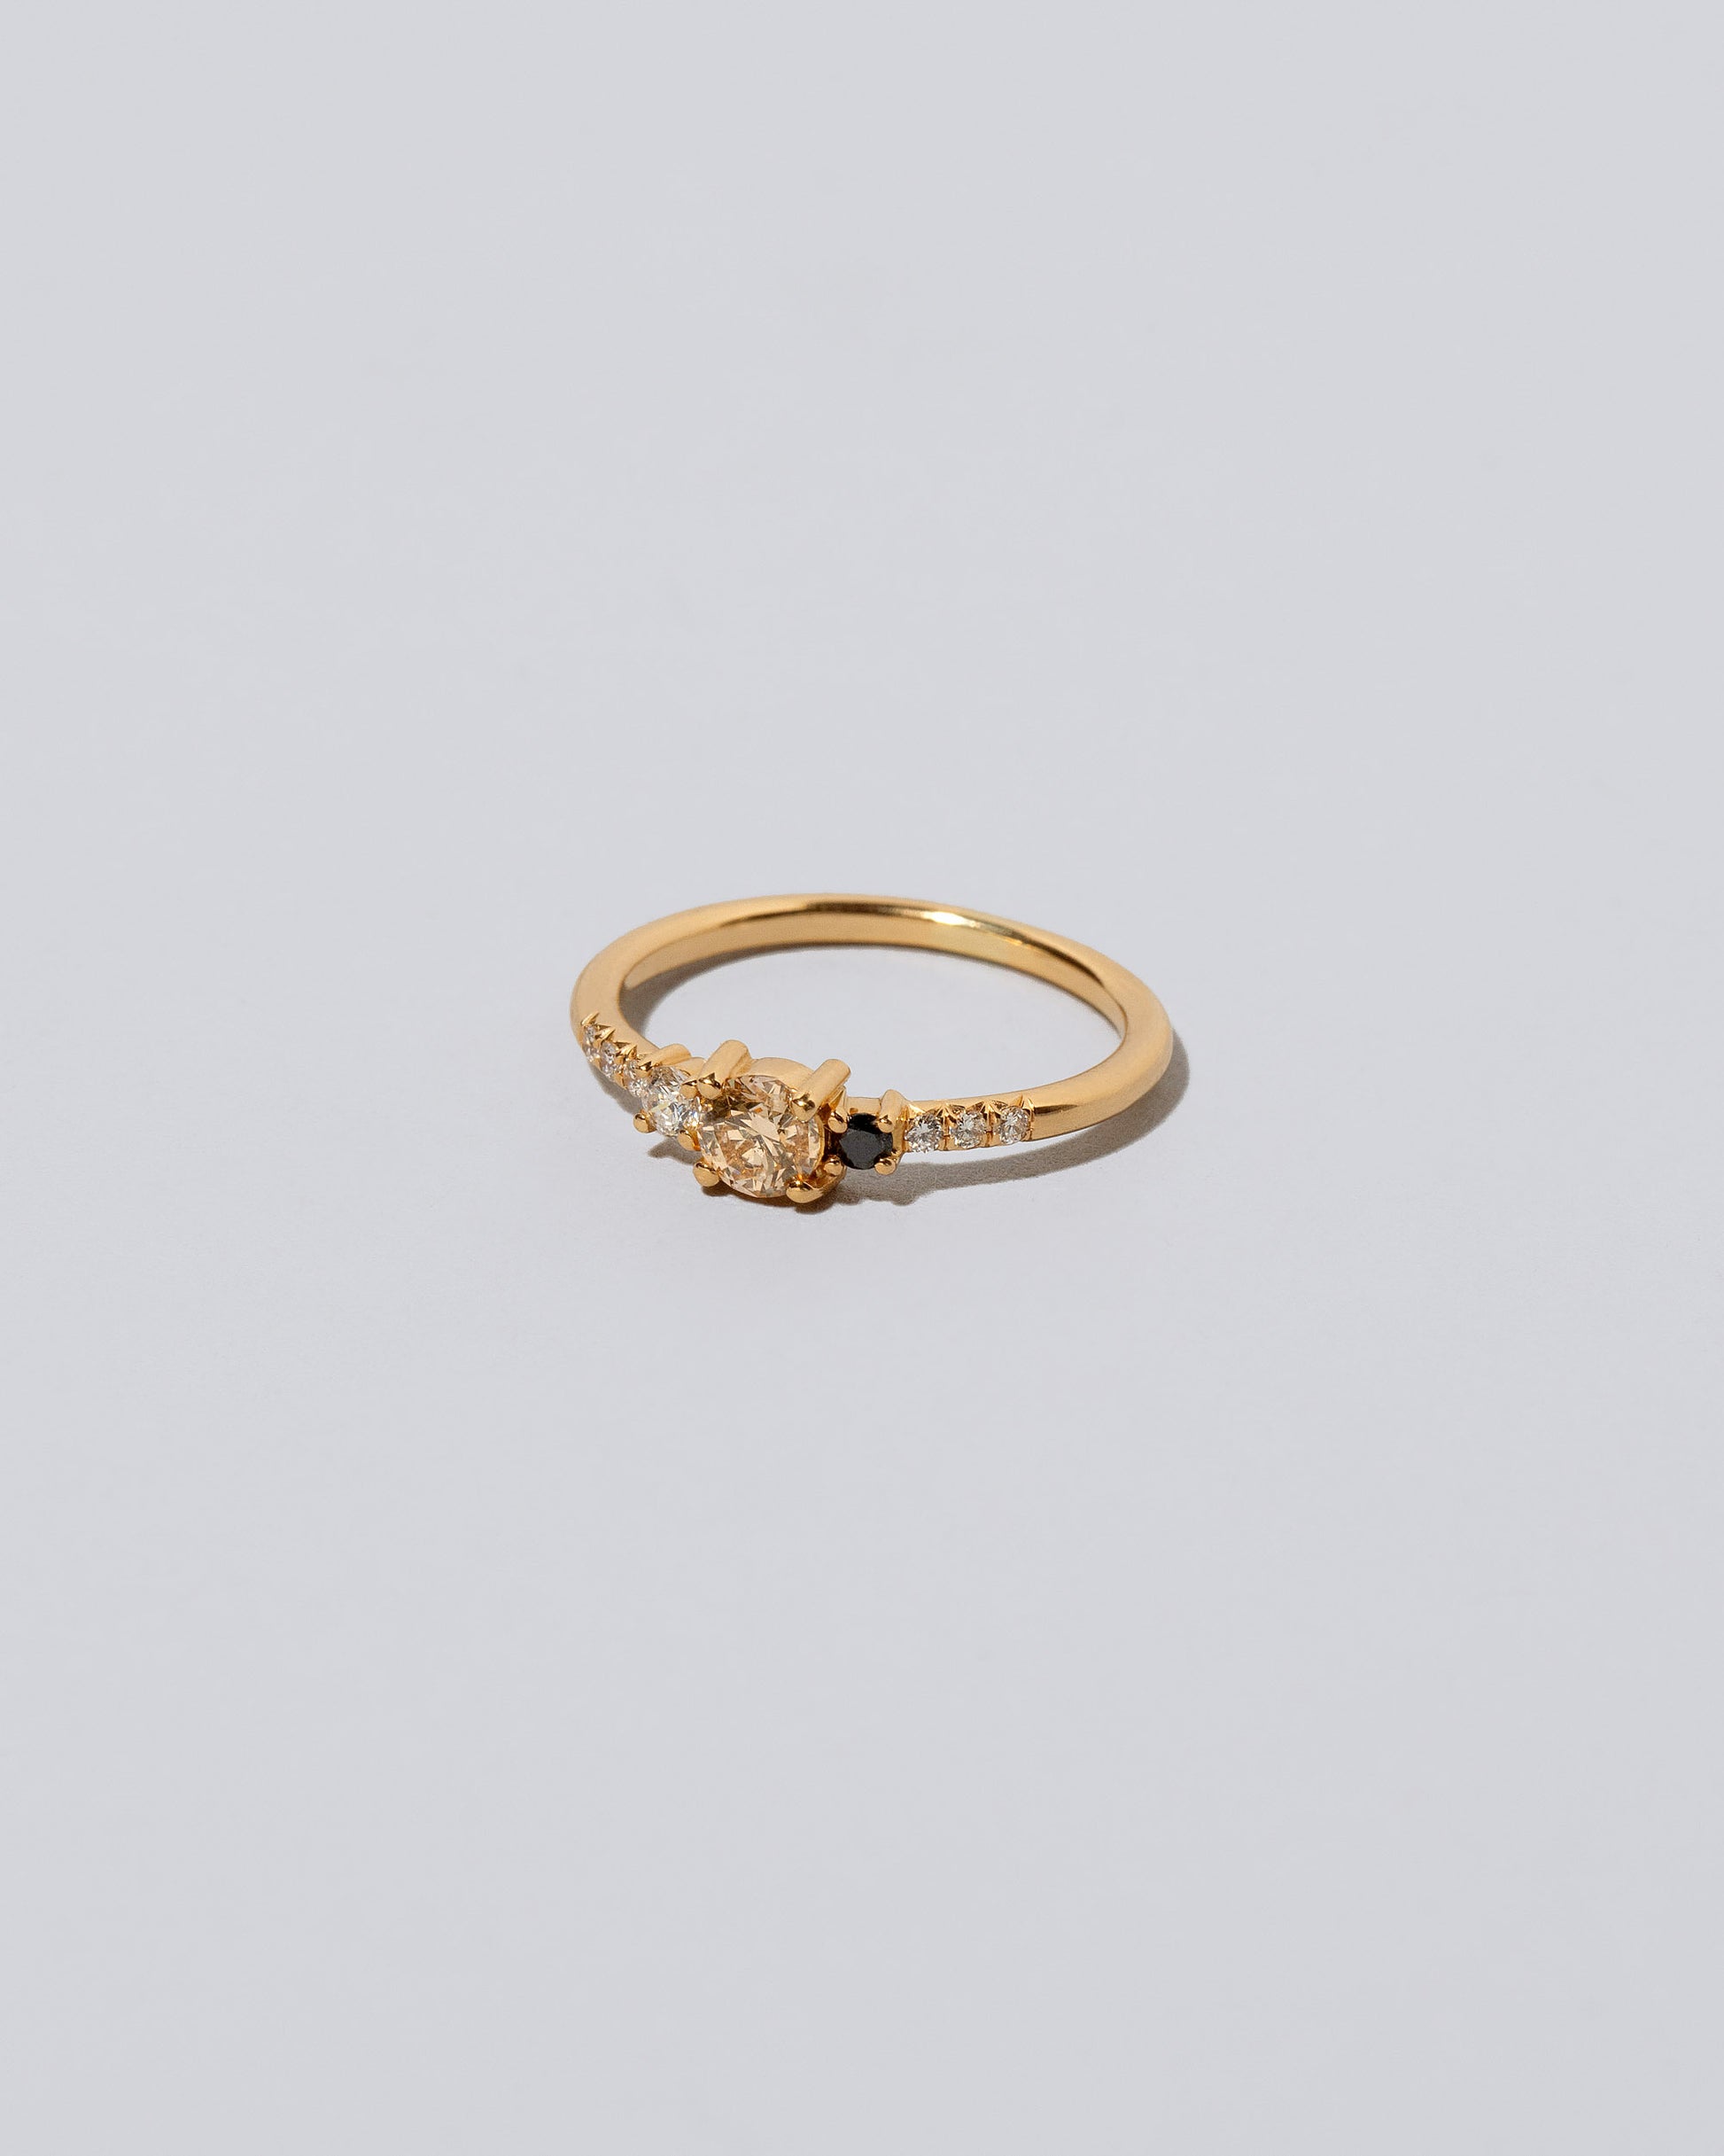 View from the side of the Champagne & Black Diamond Patira Ring on light color background.